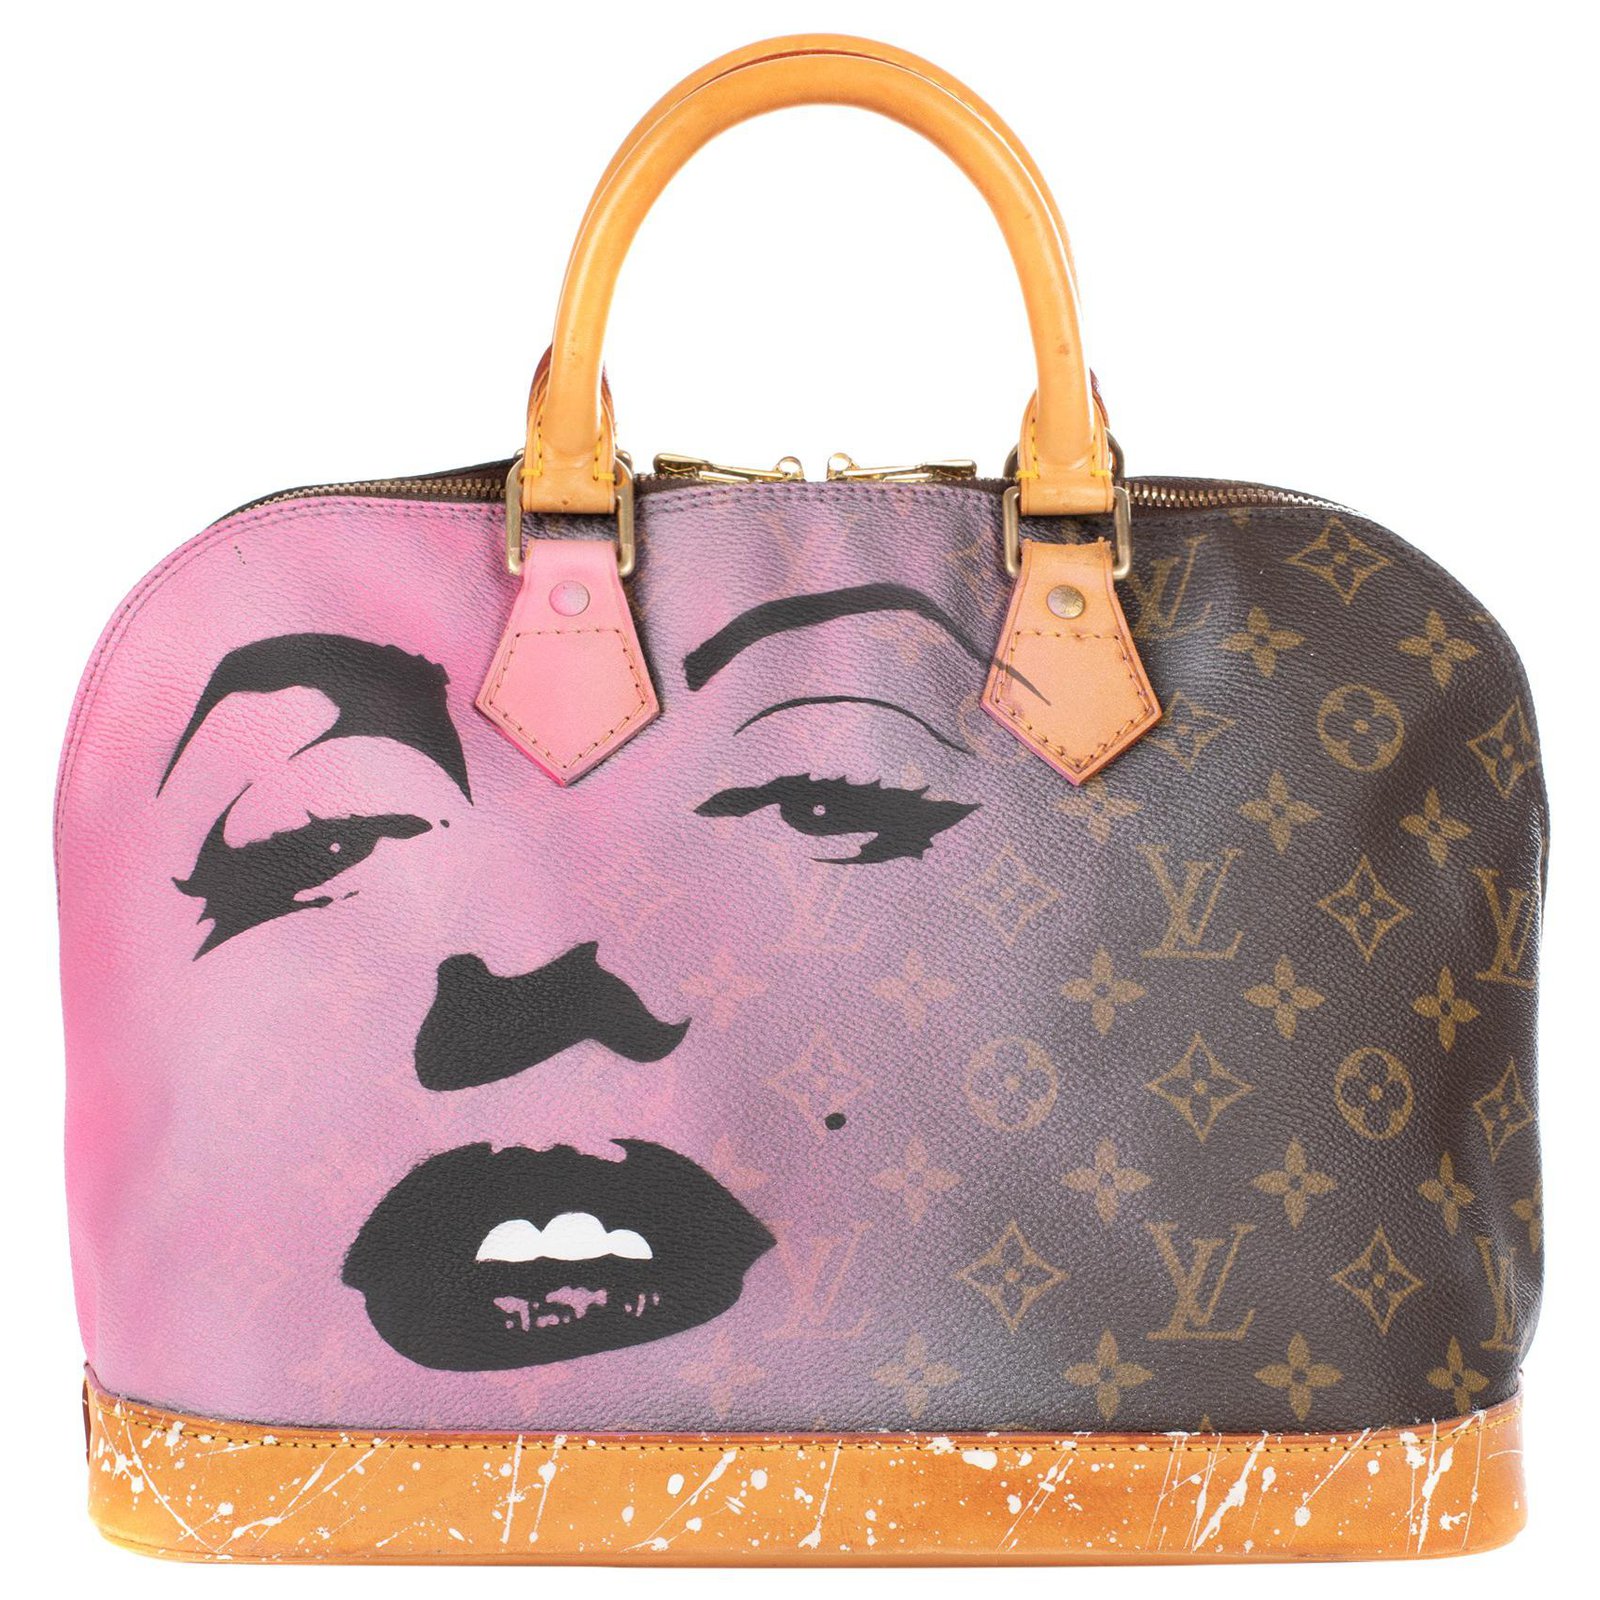 Louis Vuitton Louis Vuitton Alma Monogram bag customized &quot;Marilyn for Ever&quot; the artist by PatBo ...